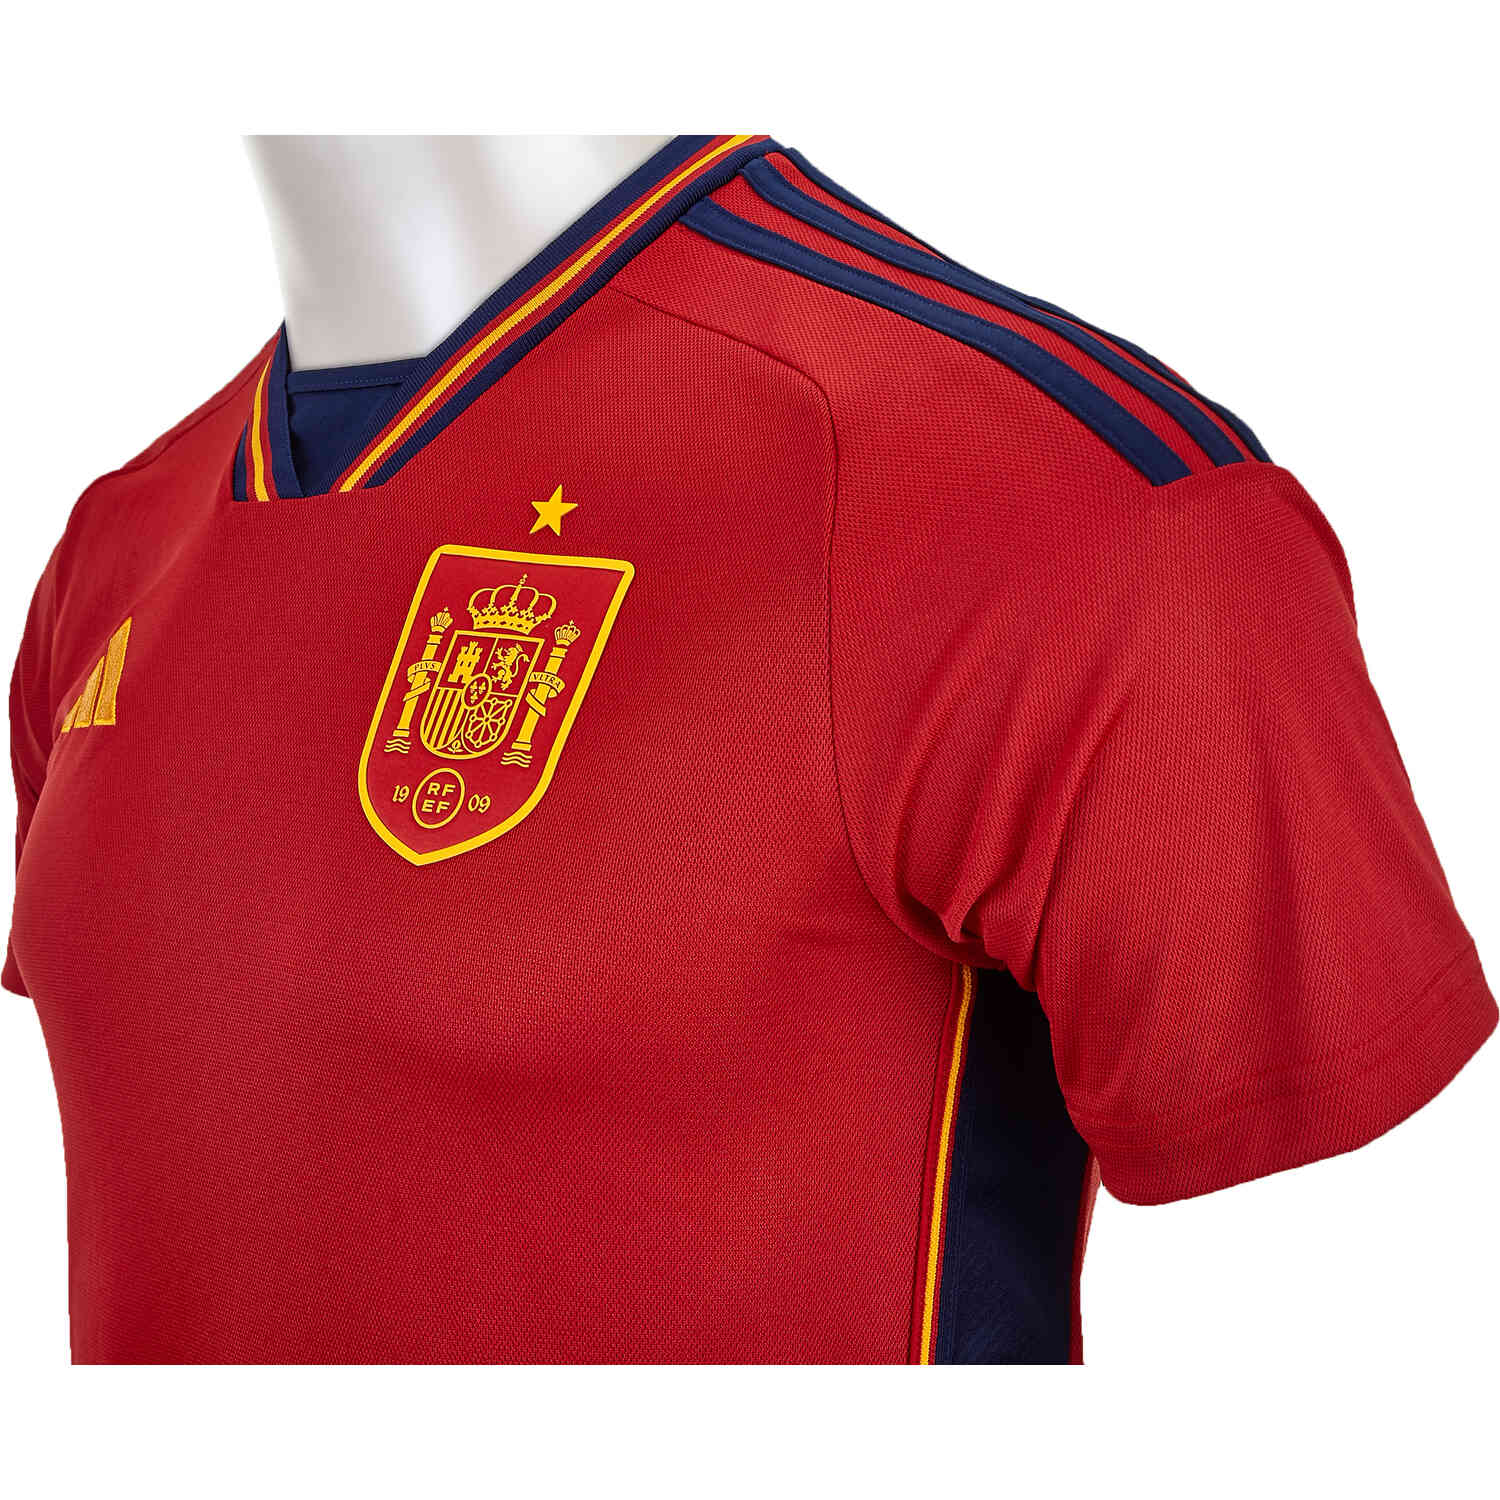 Adidas Spain Soccer Jersey 2022 WorldCup QATAR Red Men's Size M # HL1970